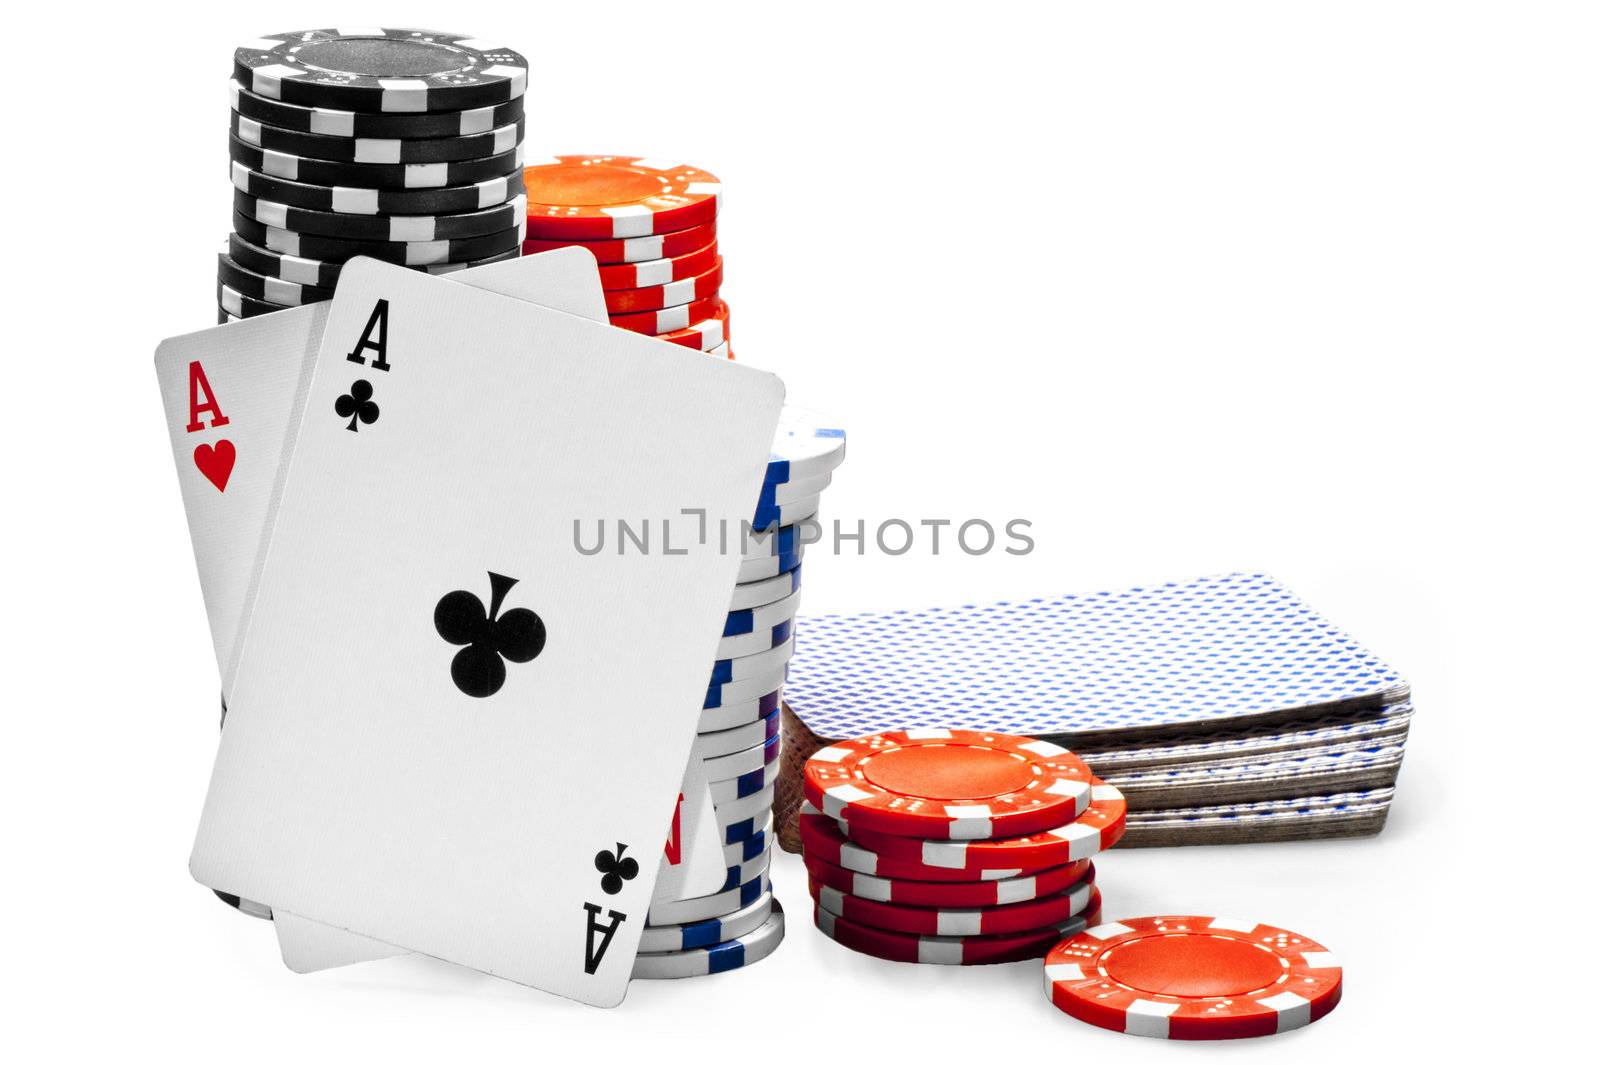 Pair of aces and poker chips by kosmsos111